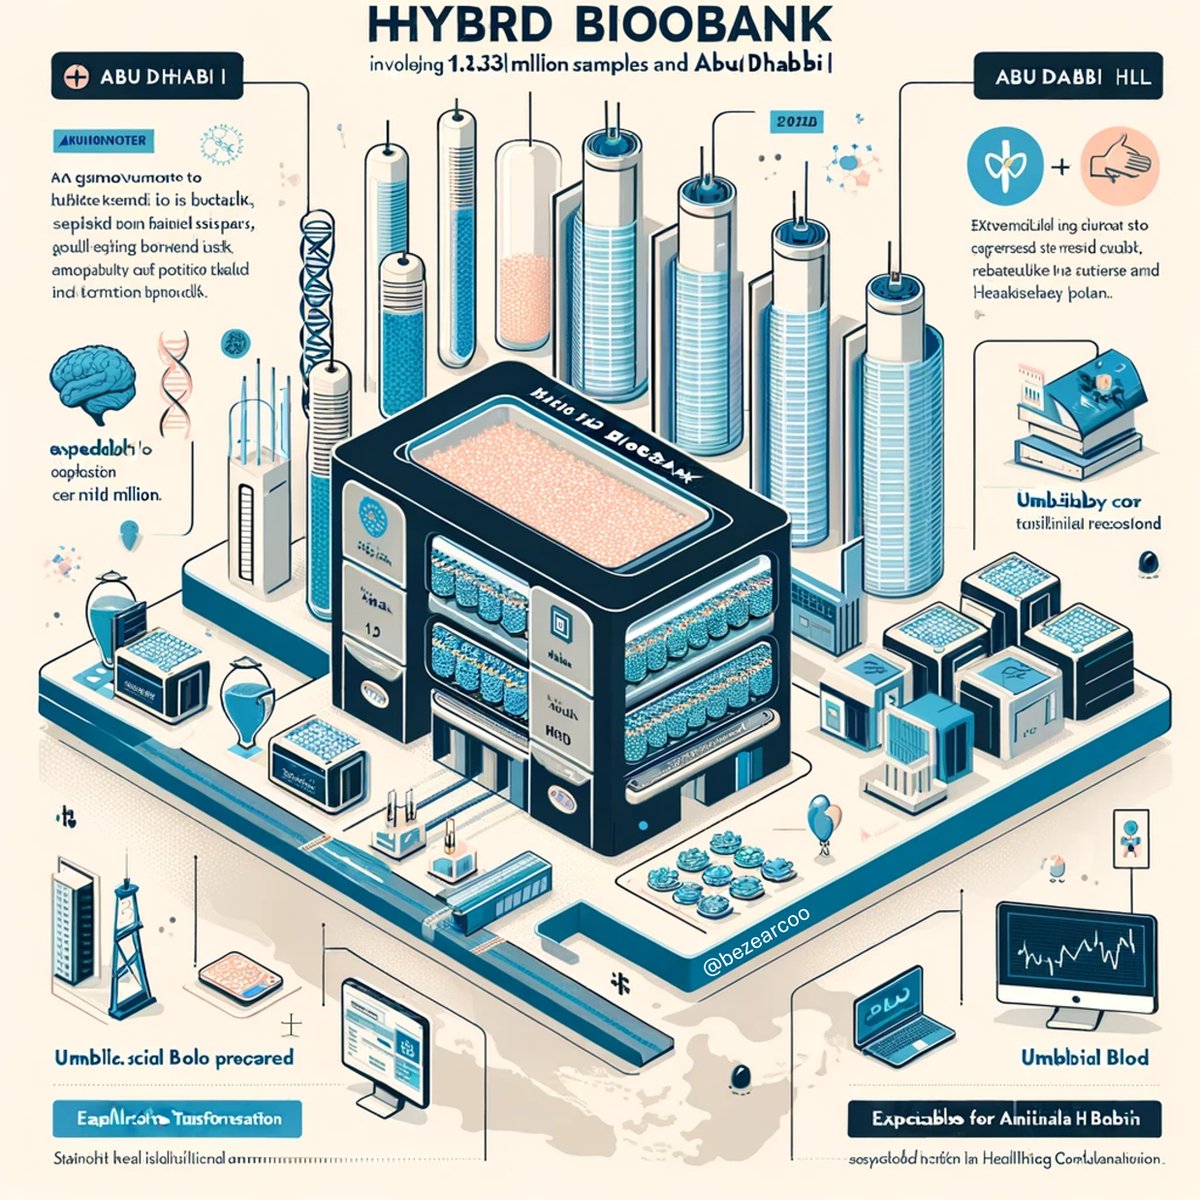 Abu Dhabi Health and M42 have recently announced the launch of a significant biobank in the region, which is part of a broader initiative by M42 to enhance healthcare through technology and integration of advanced medical practices. This biobank is noteworthy as it is designed to…